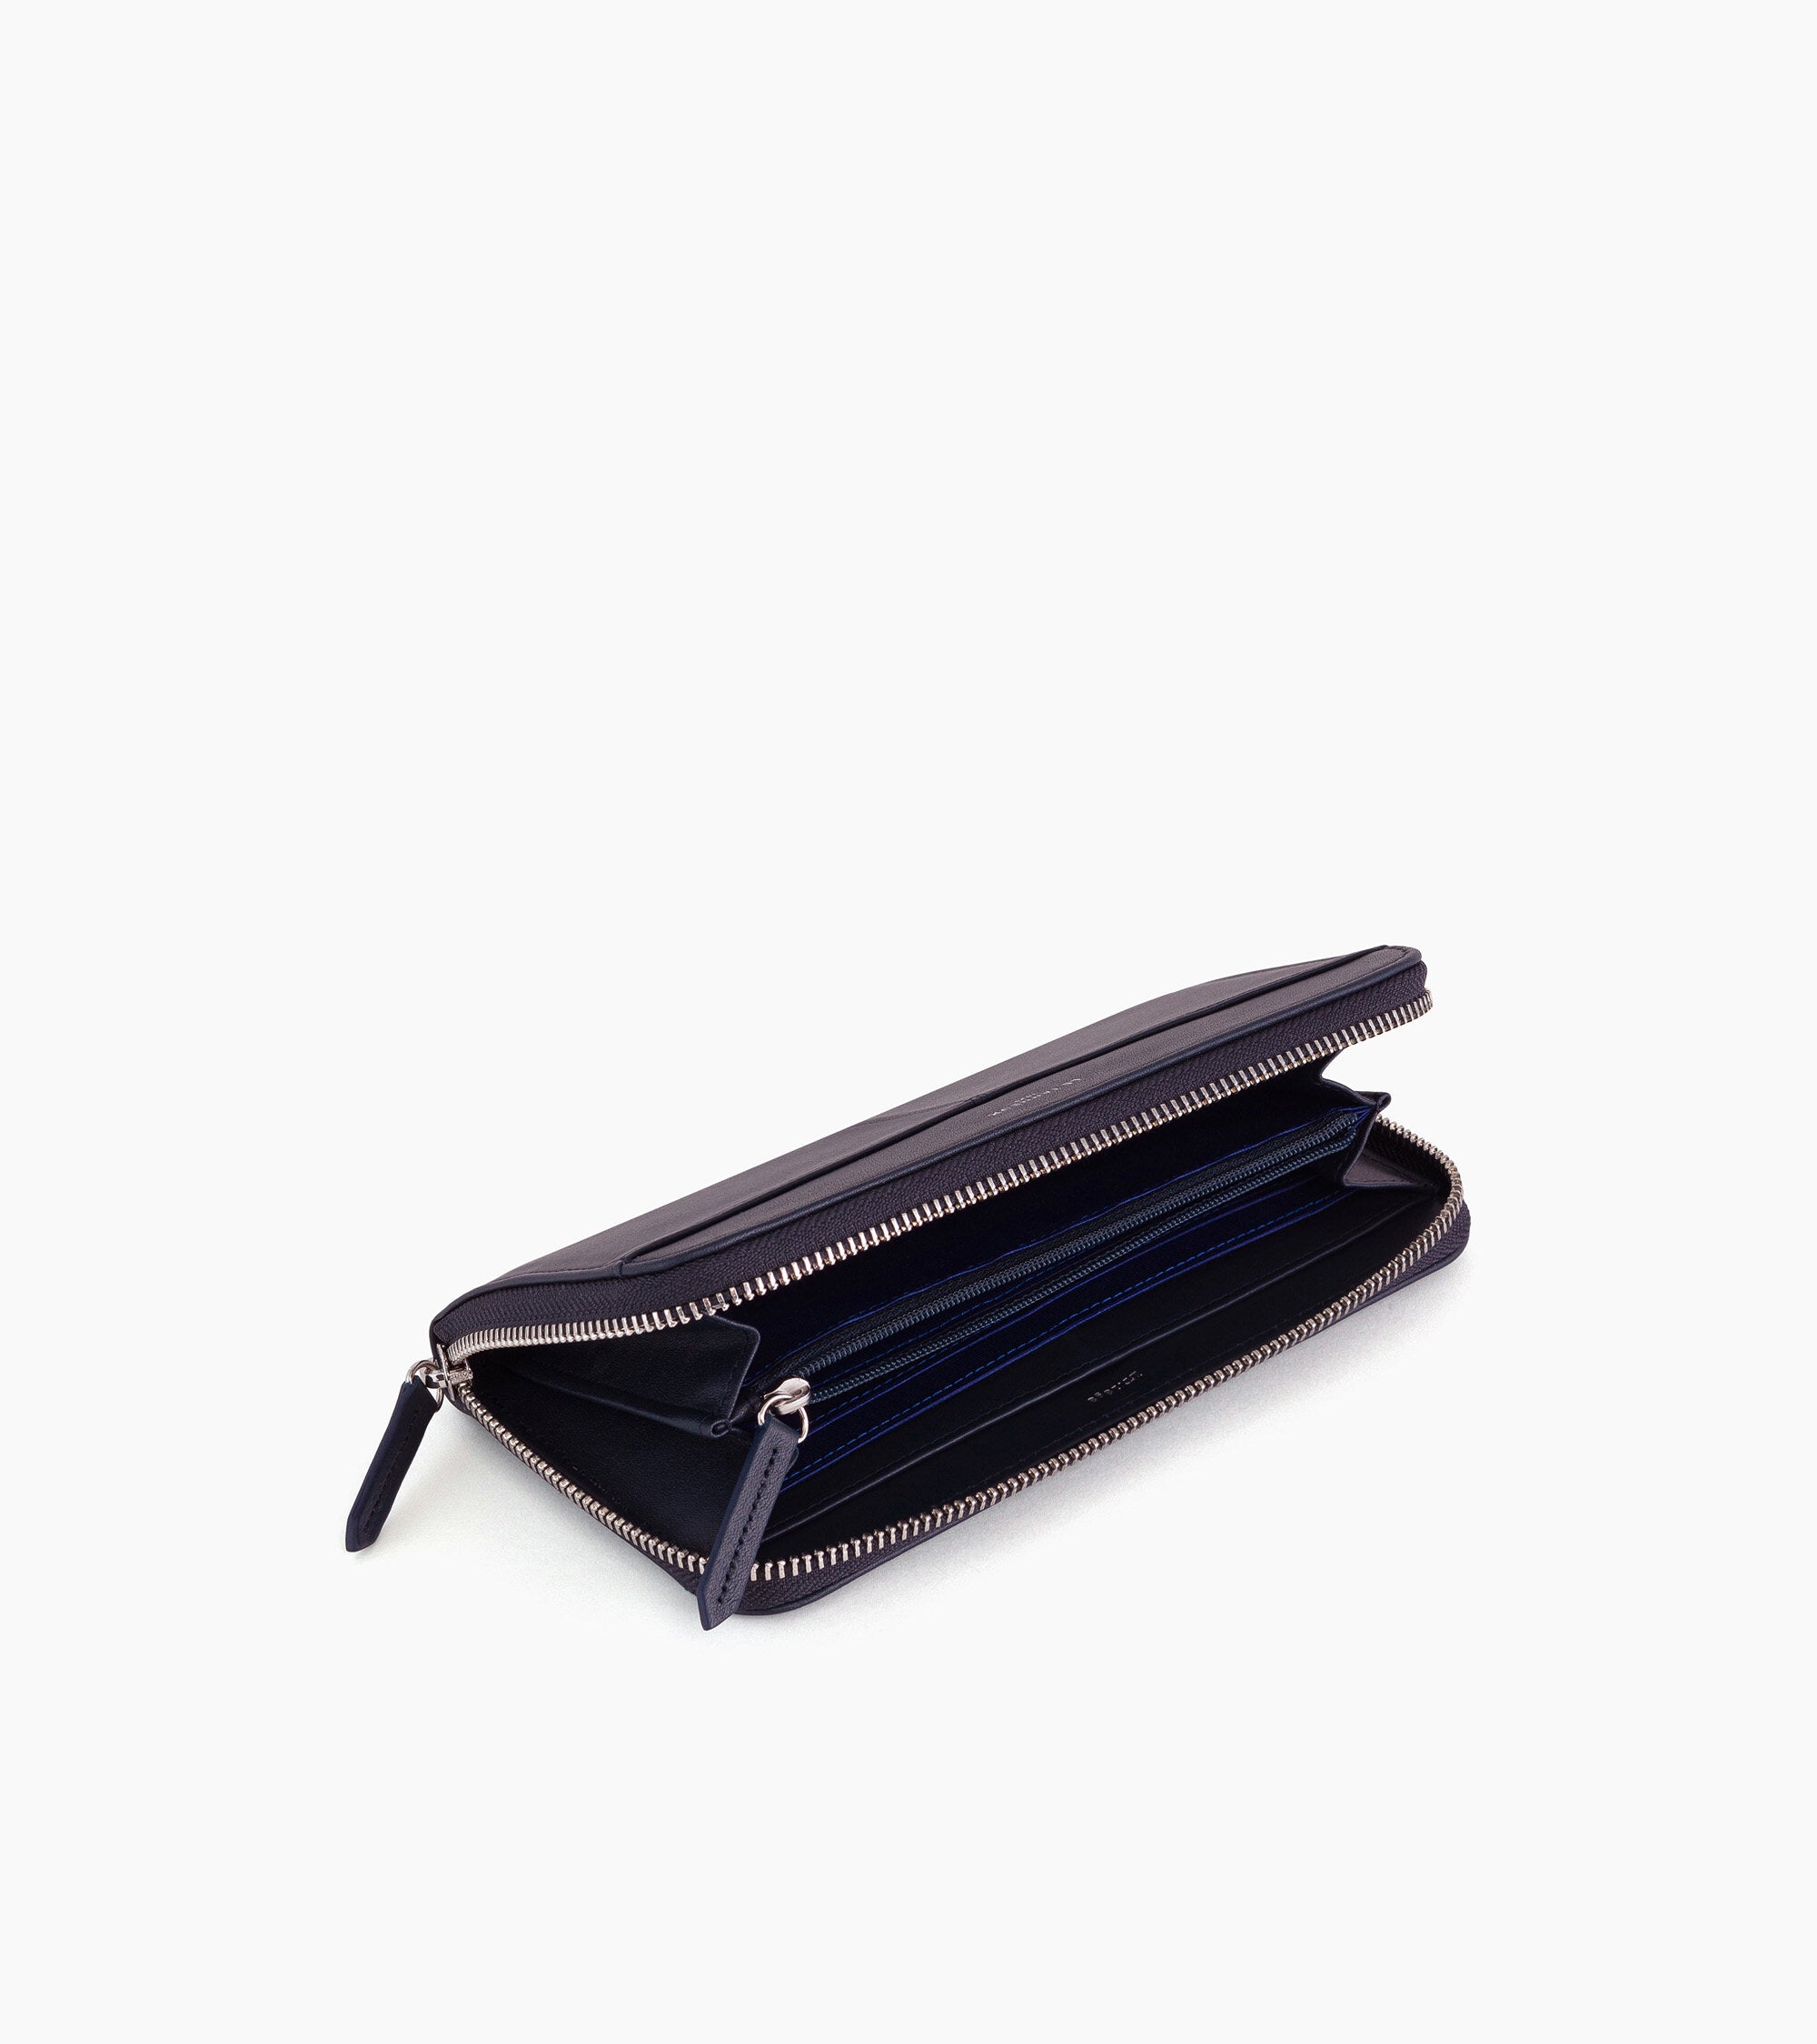 Charlotte smooth leather Organizer wallet